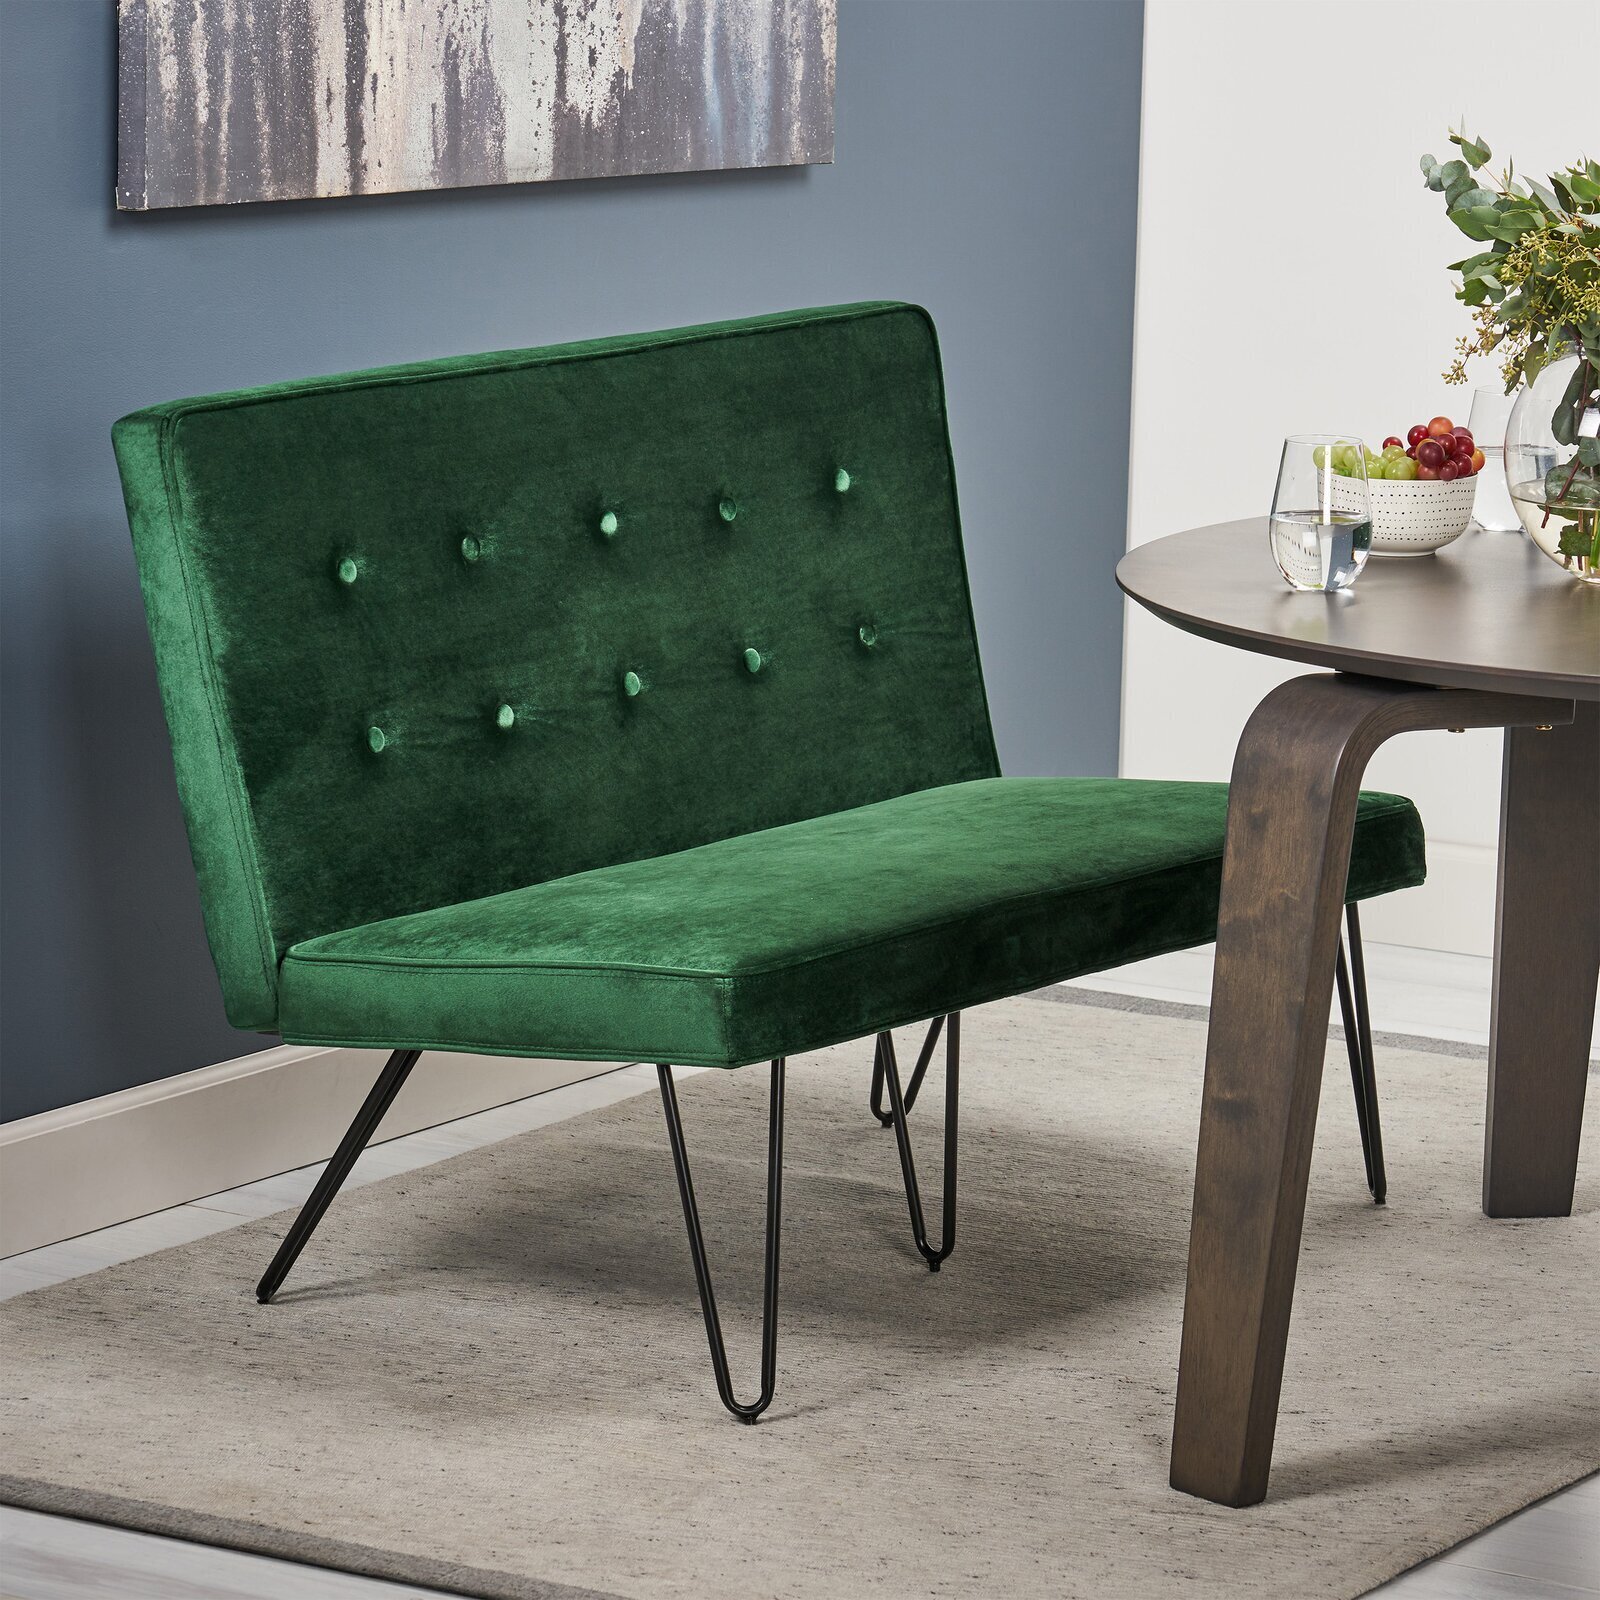 Emerald Upholstered Bench With Back For Dining Table 